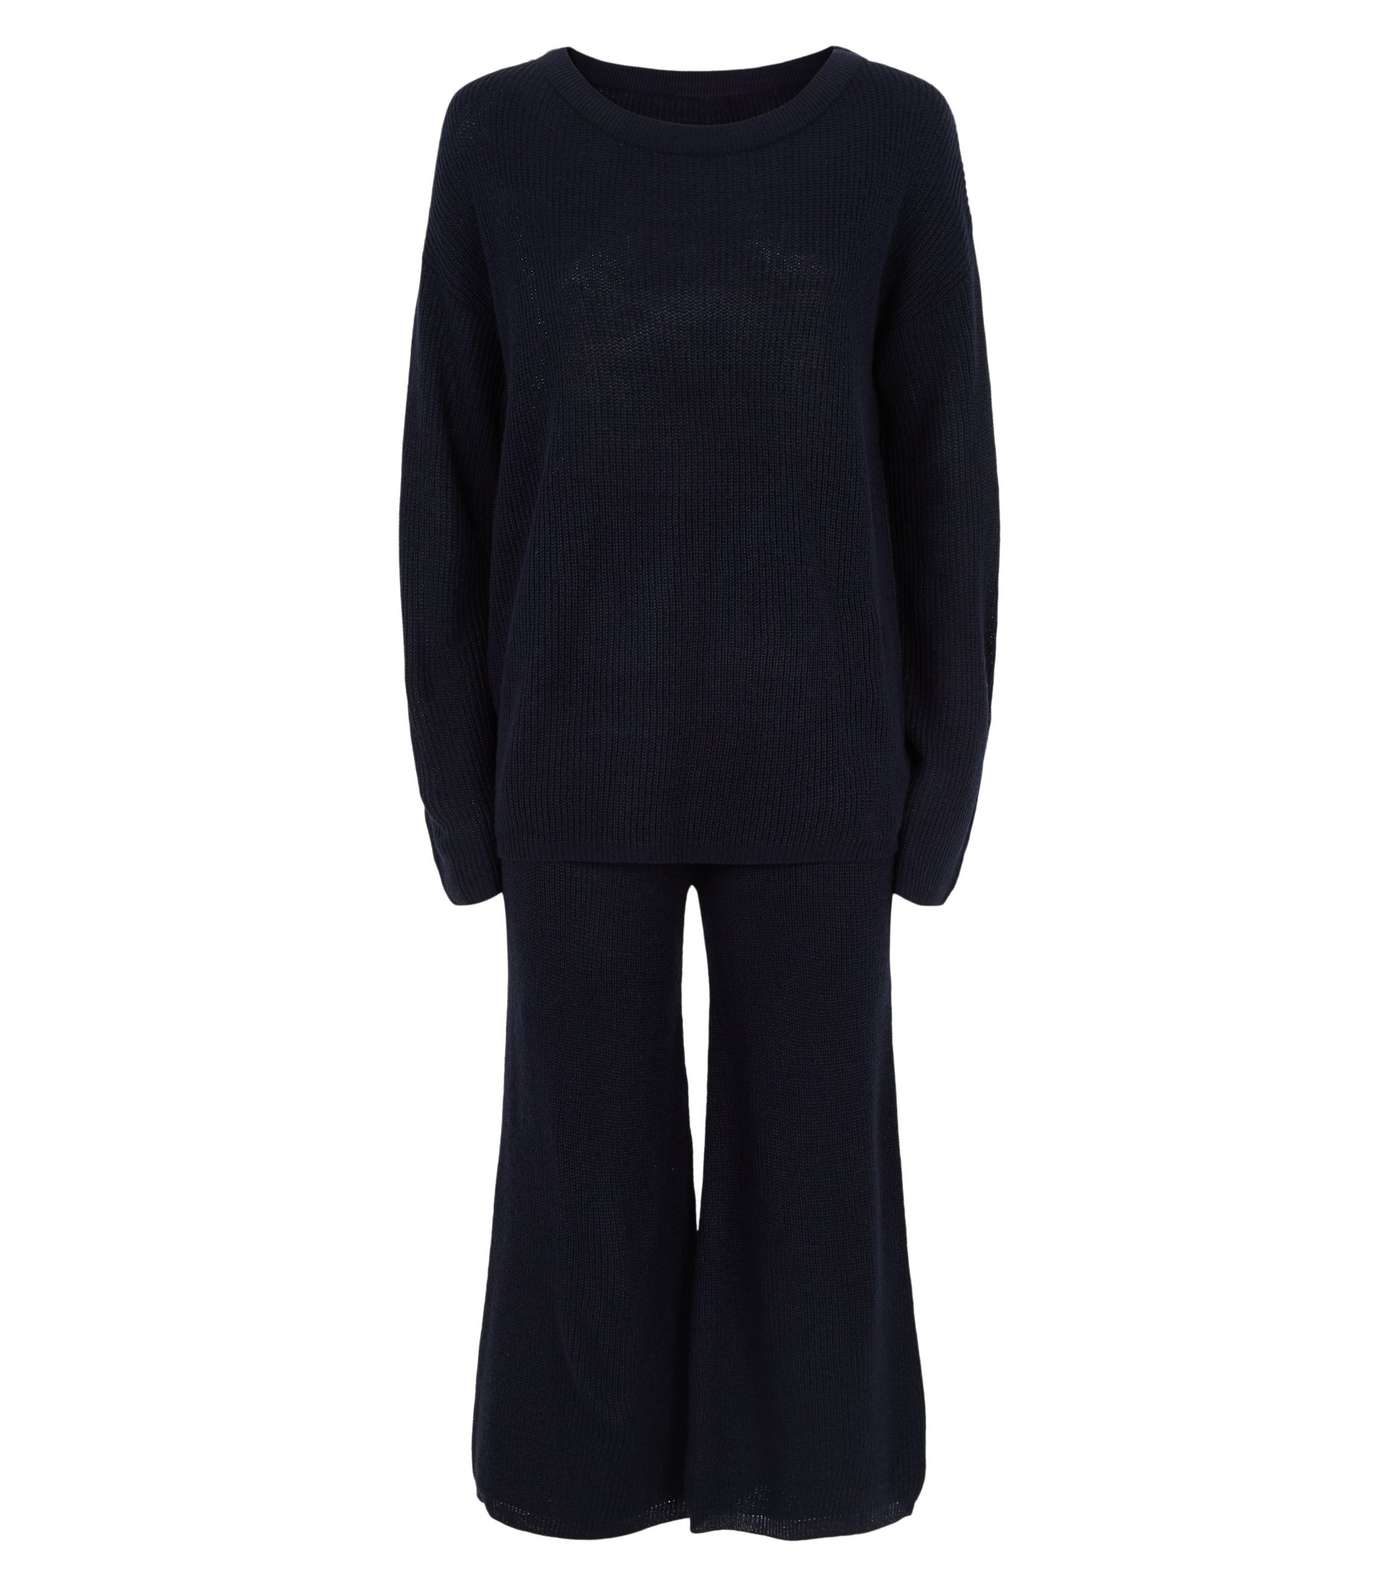 Brave Soul Navy Knit Jumper and Trousers Set Image 4